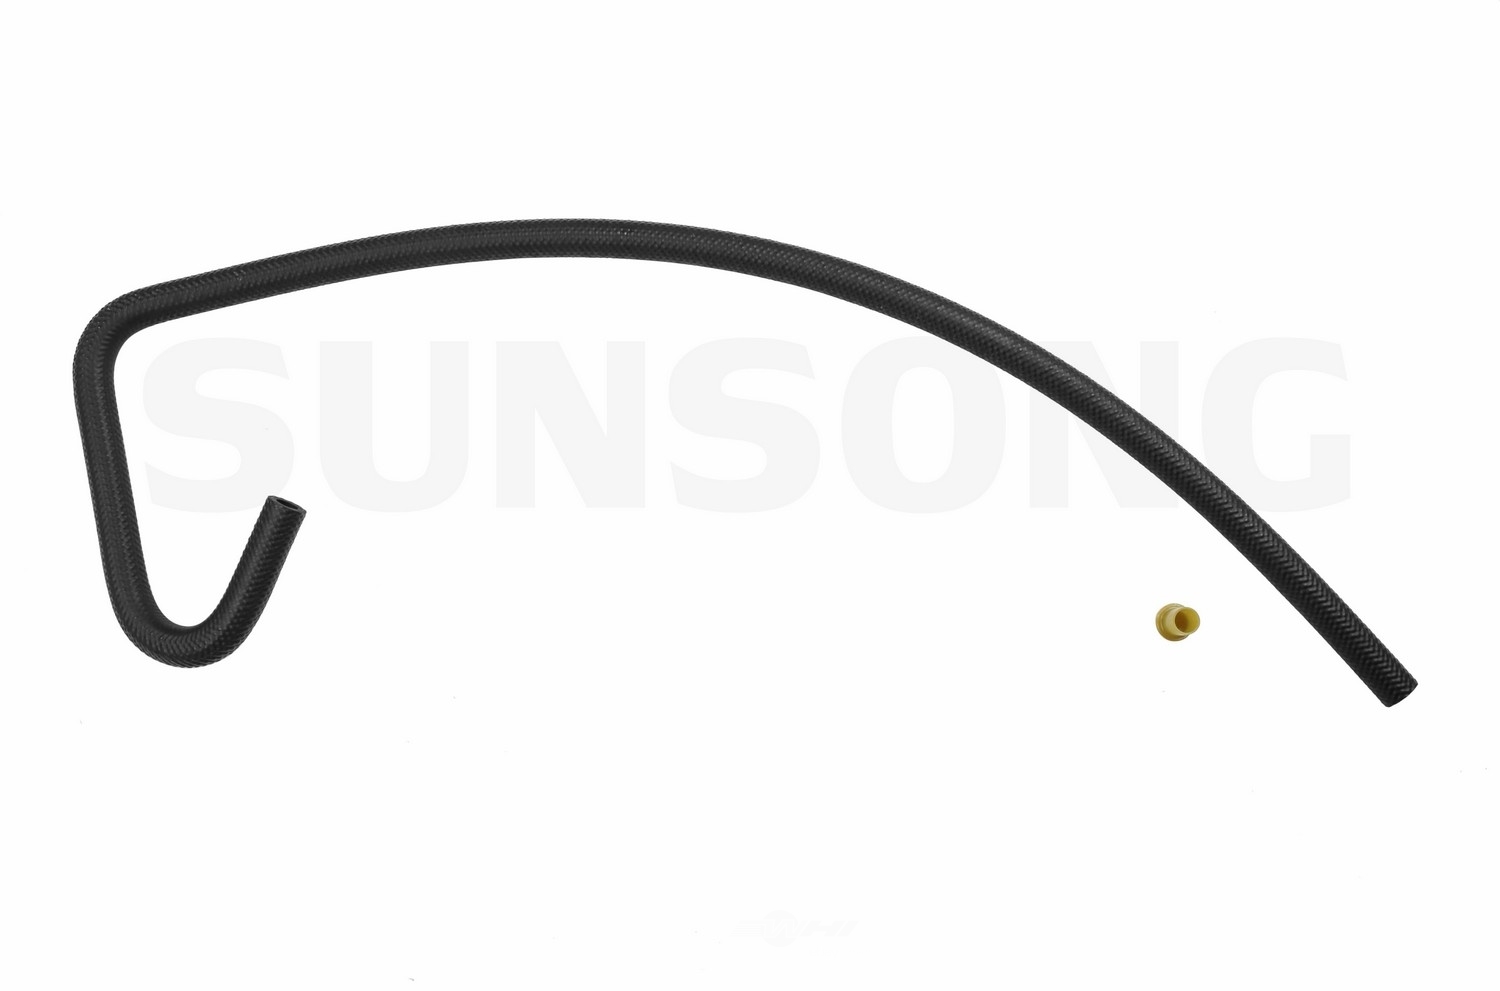 SUNSONG NORTH AMERICA - Power Steering Return Line Hose Assembly (Hydroboost To Pump) - SUG 3402199